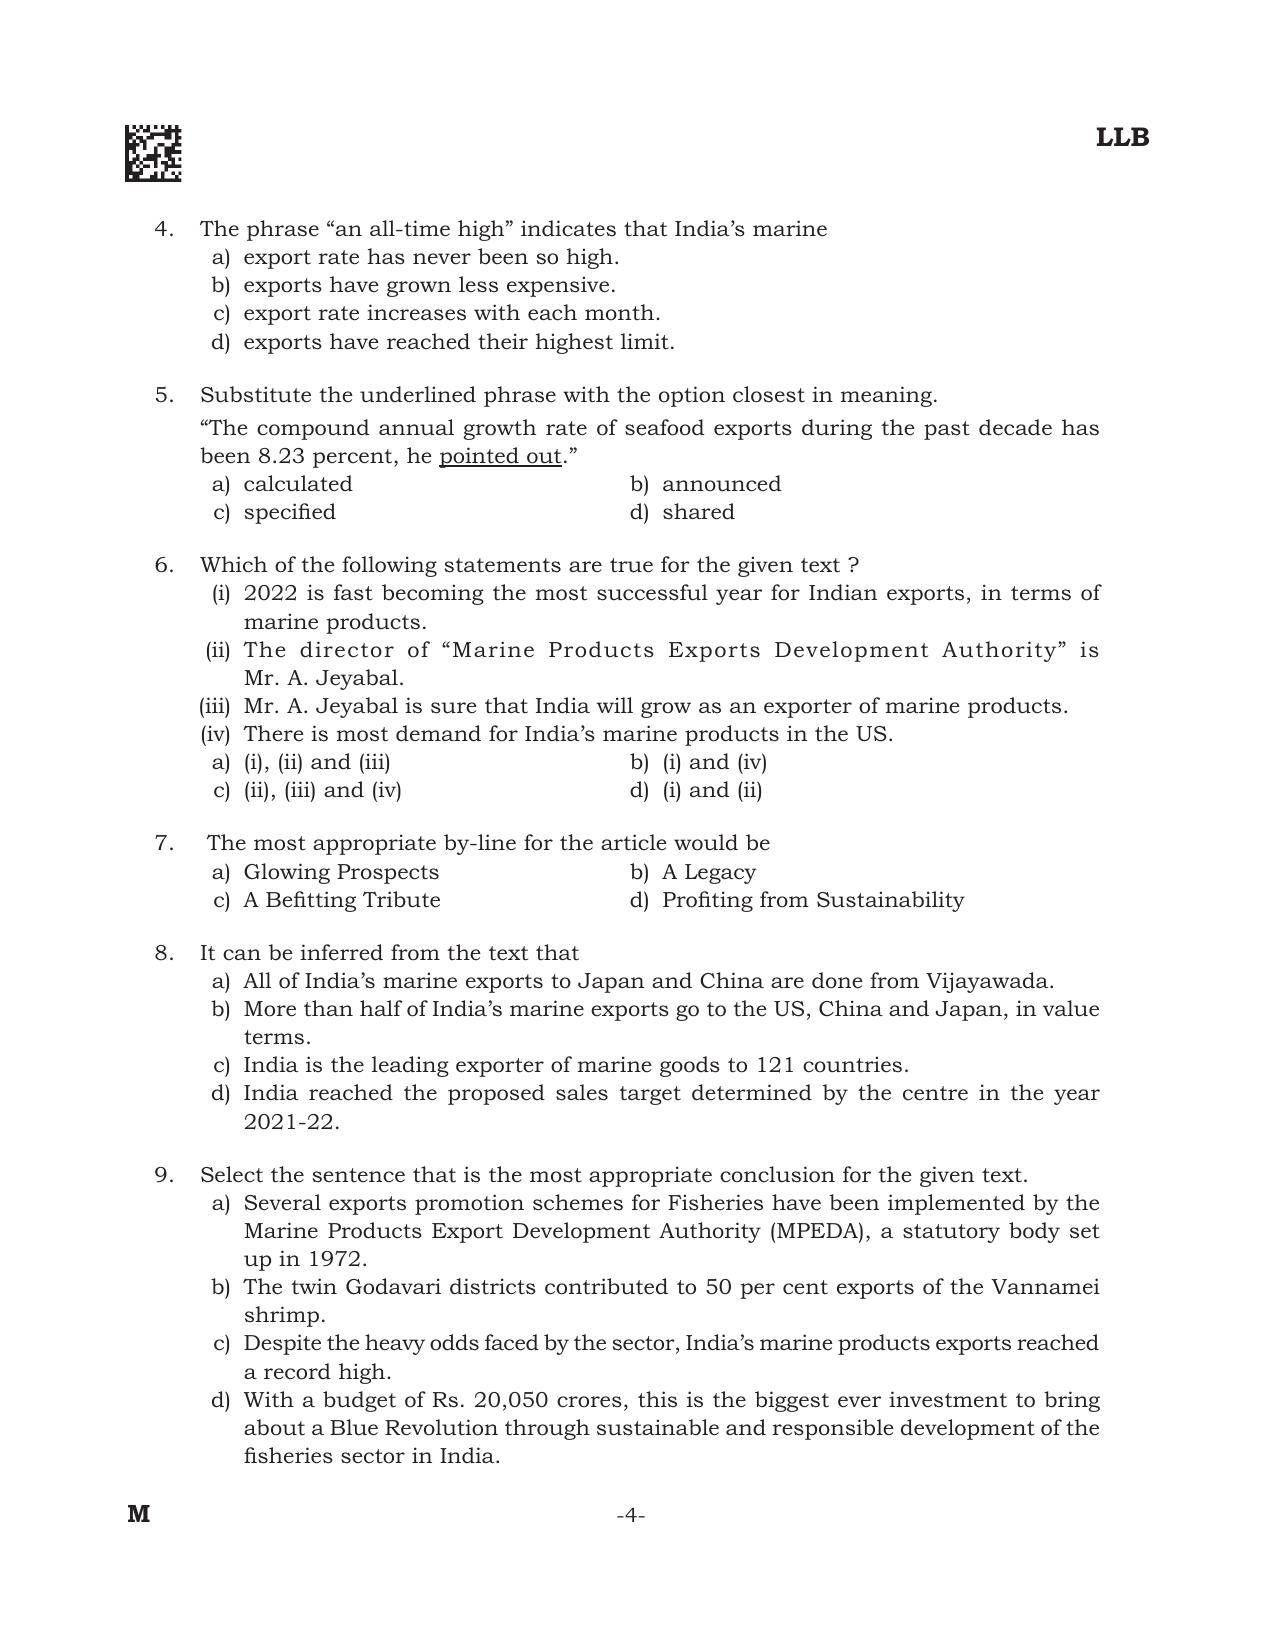 AILET 2022 Question Paper for BA LLB - Page 4